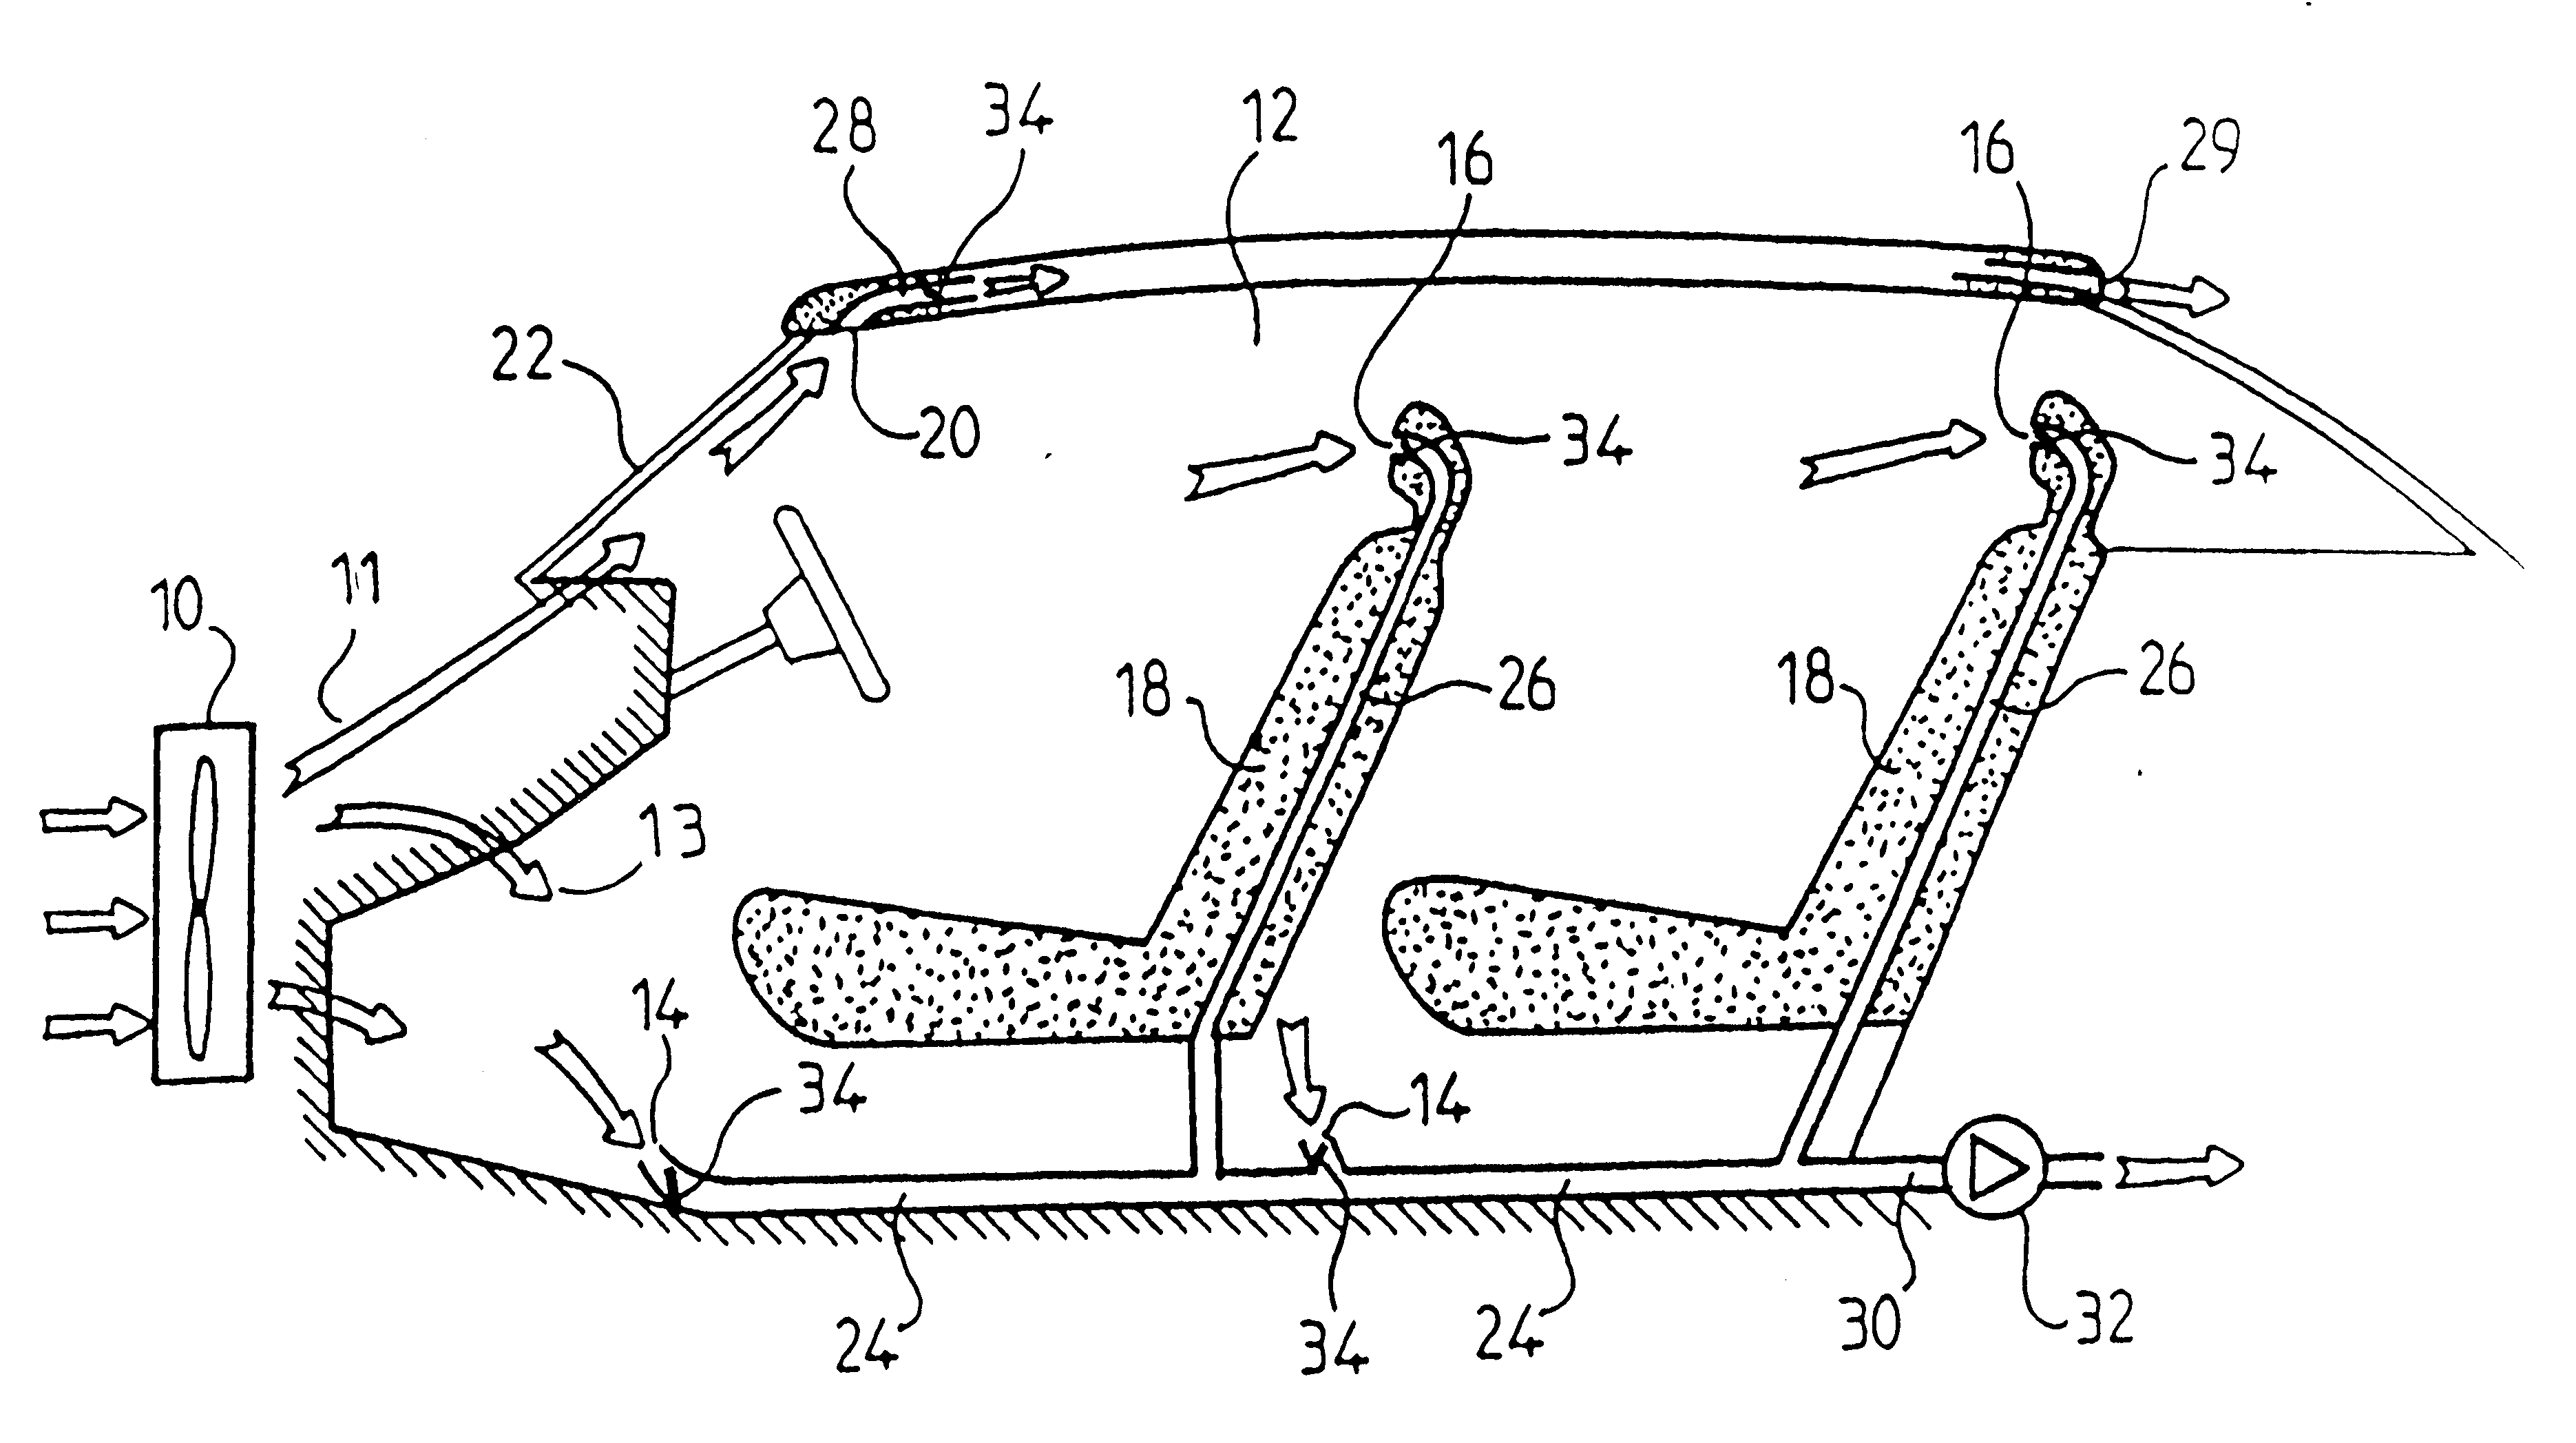 Installation for heating and/or ventilating the passenger compartment of a vehicle employing selective extraction of air